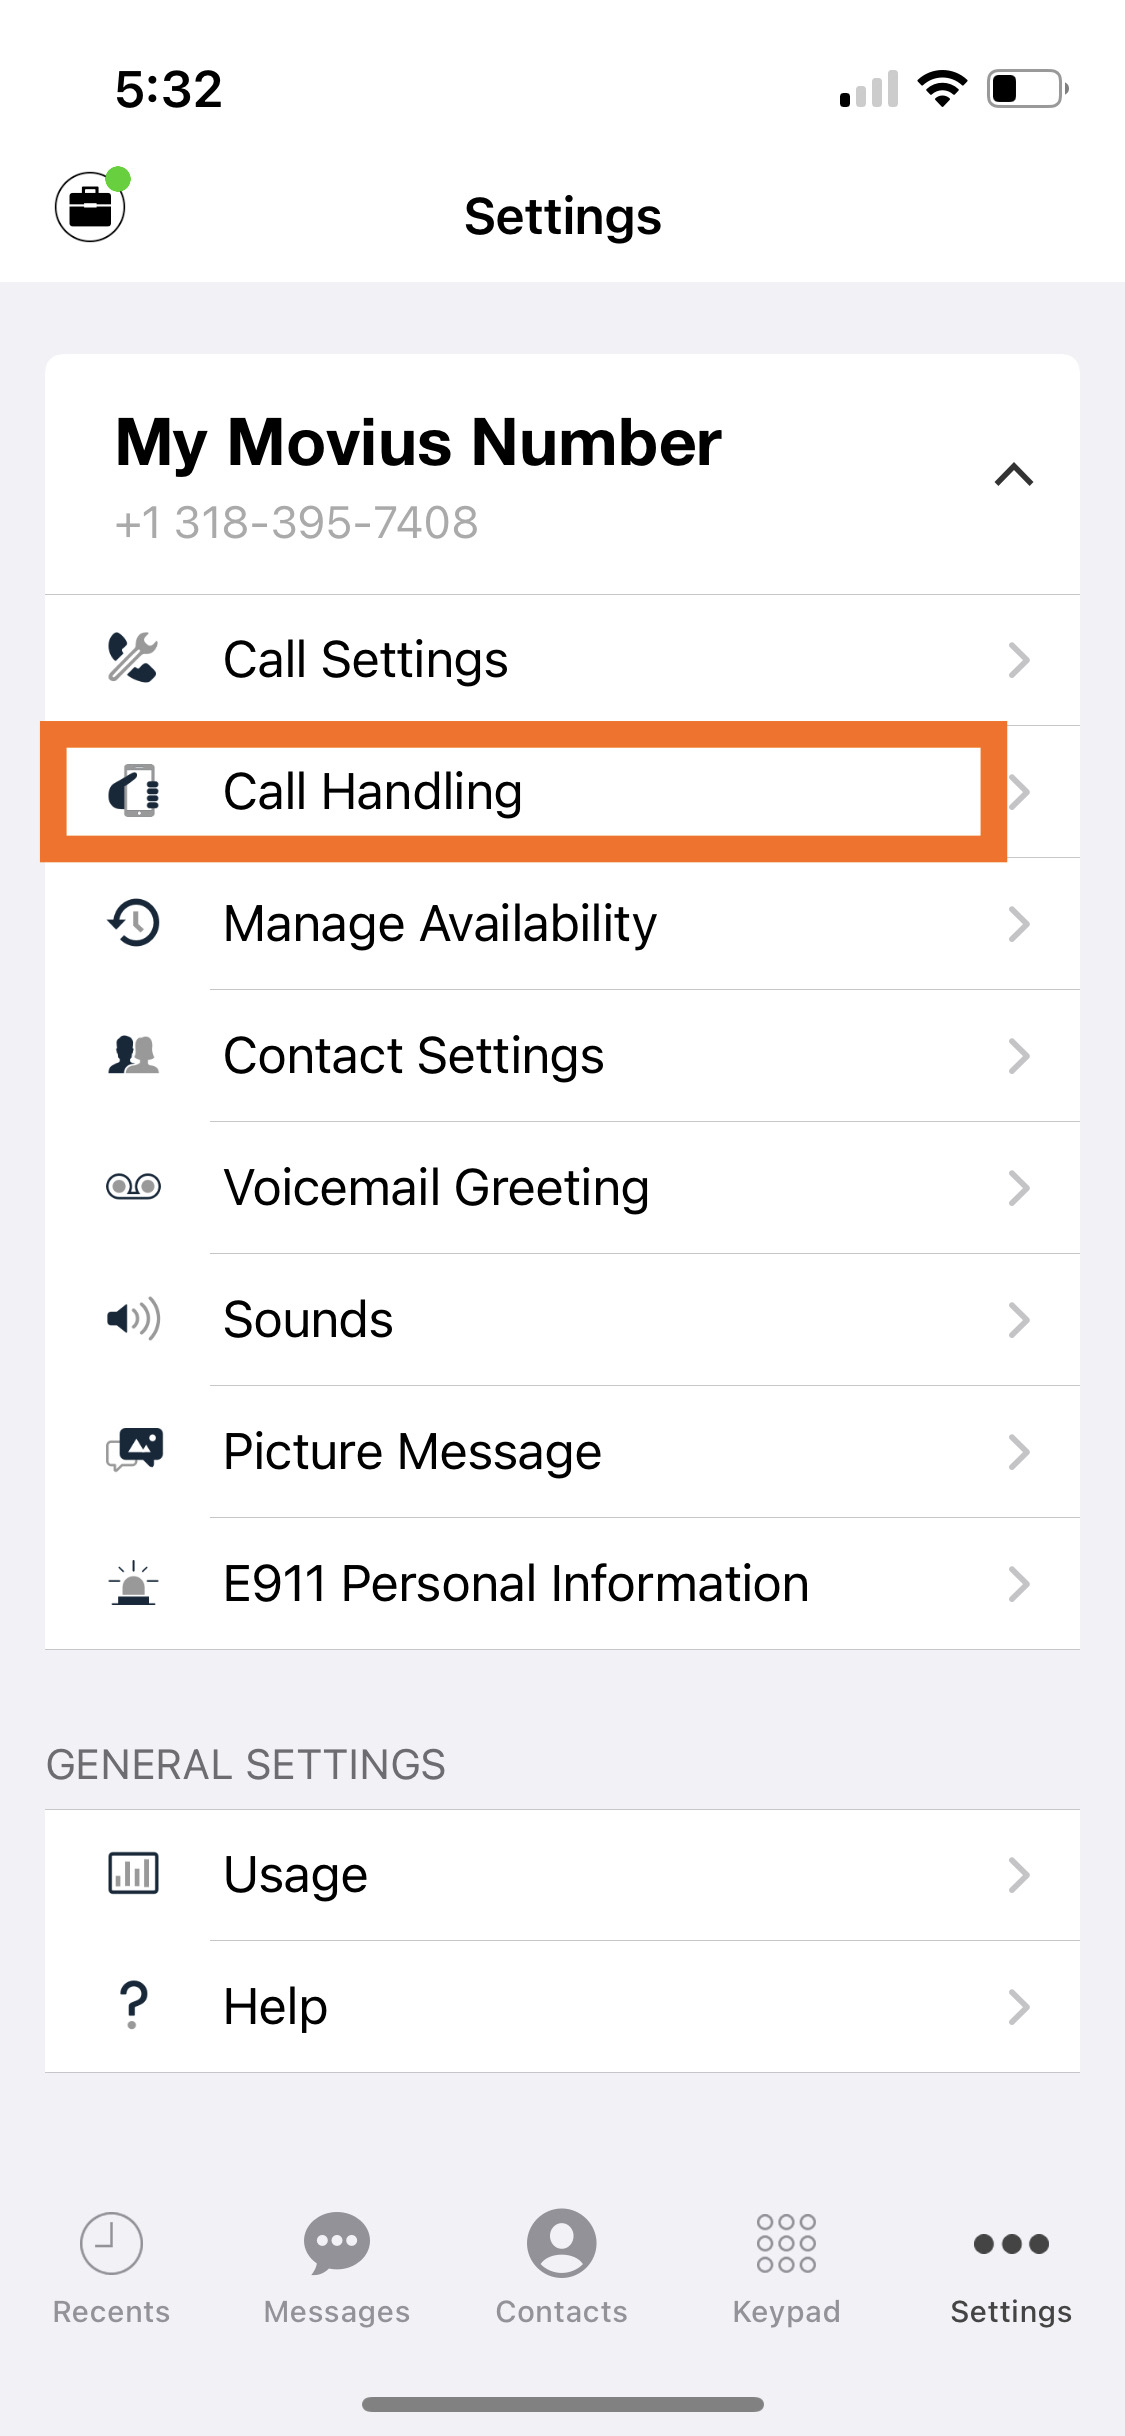 Settings menu with "Call Handling" highlighted